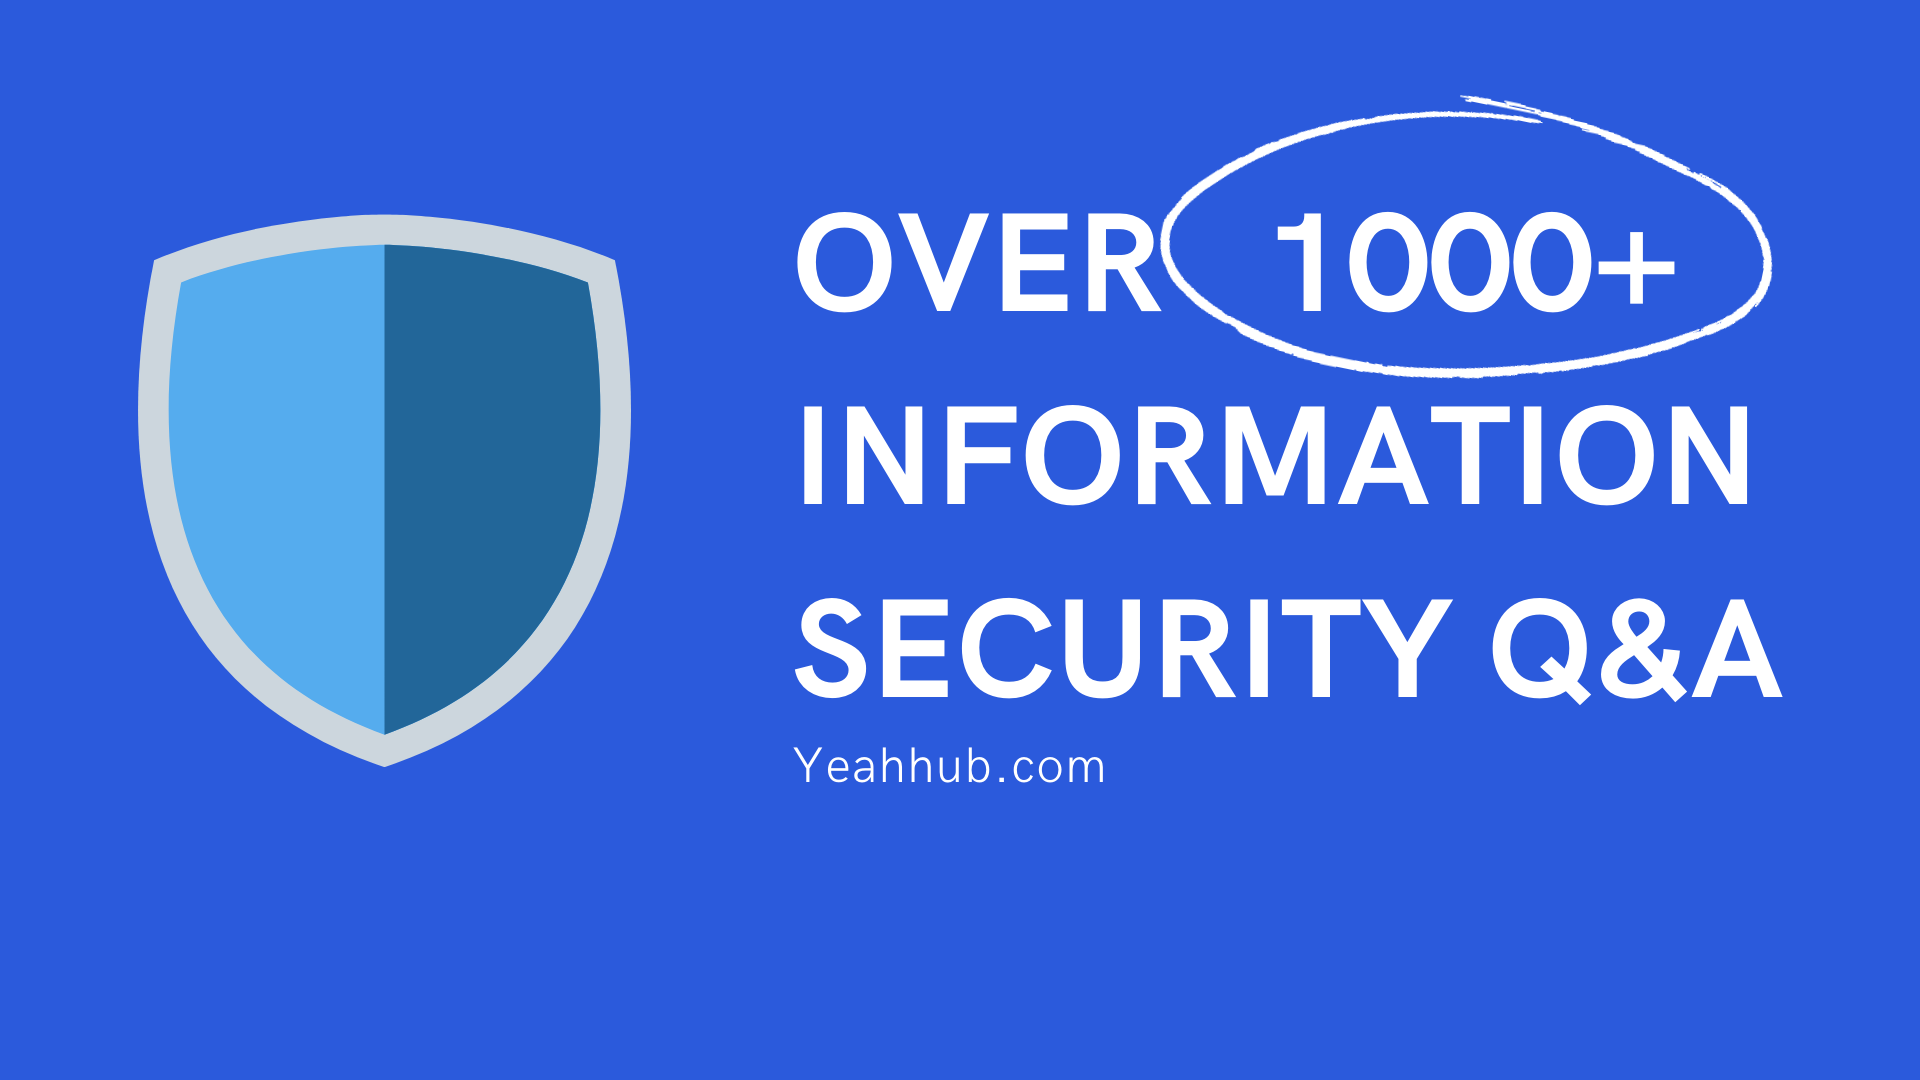 OVER 1000+ INFORMATION SECURITY Q&A